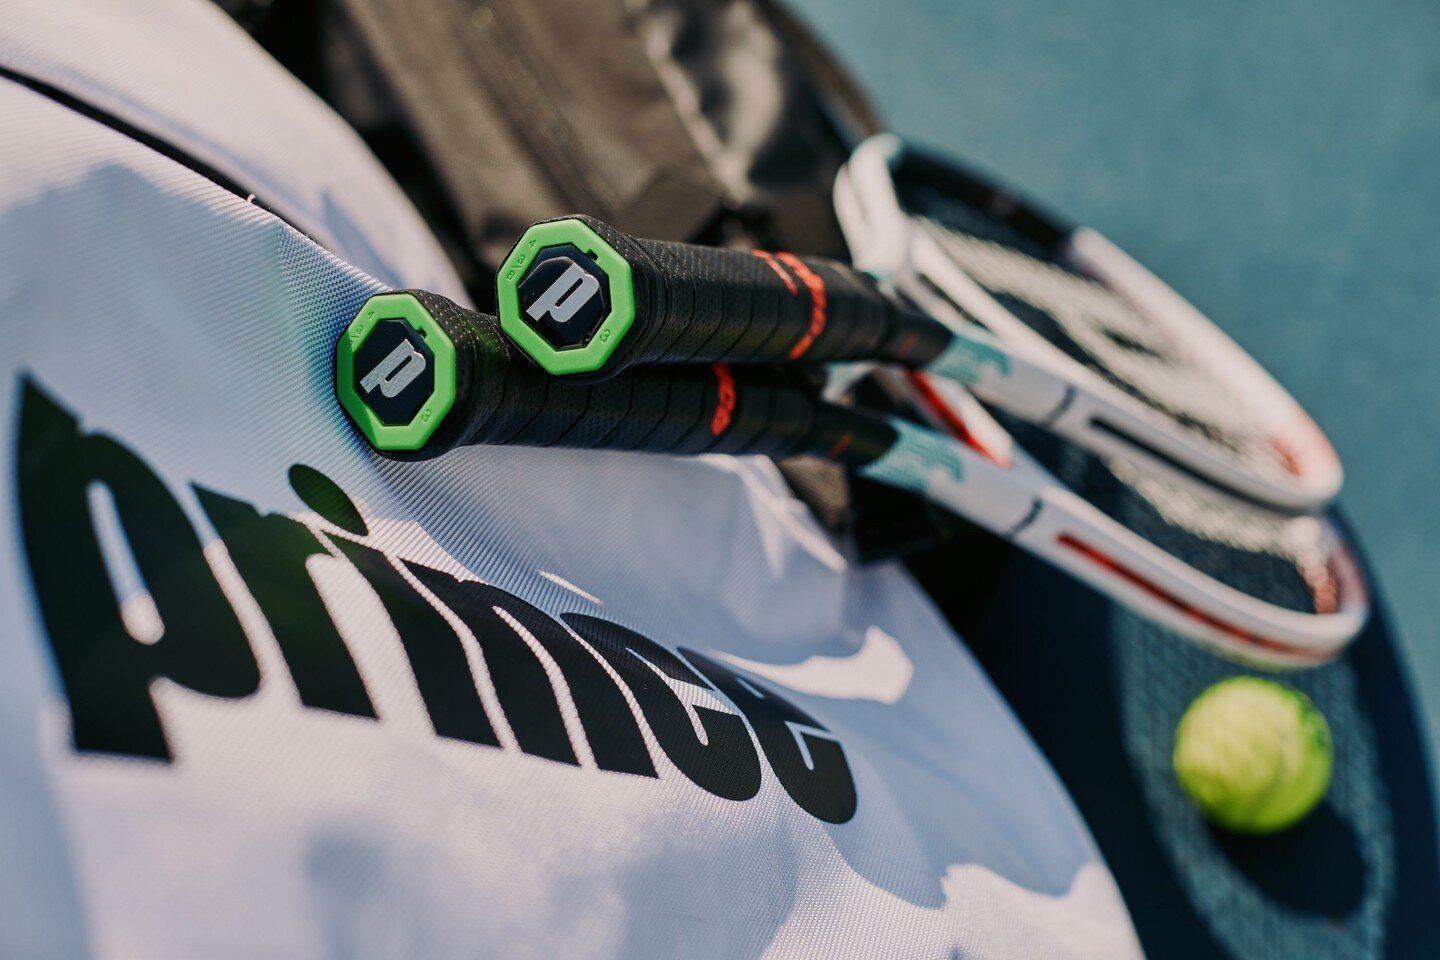 Double up with our latest Tour racquet 🎾🎾 Get the perfect blend of controllable power with great feel and stability.